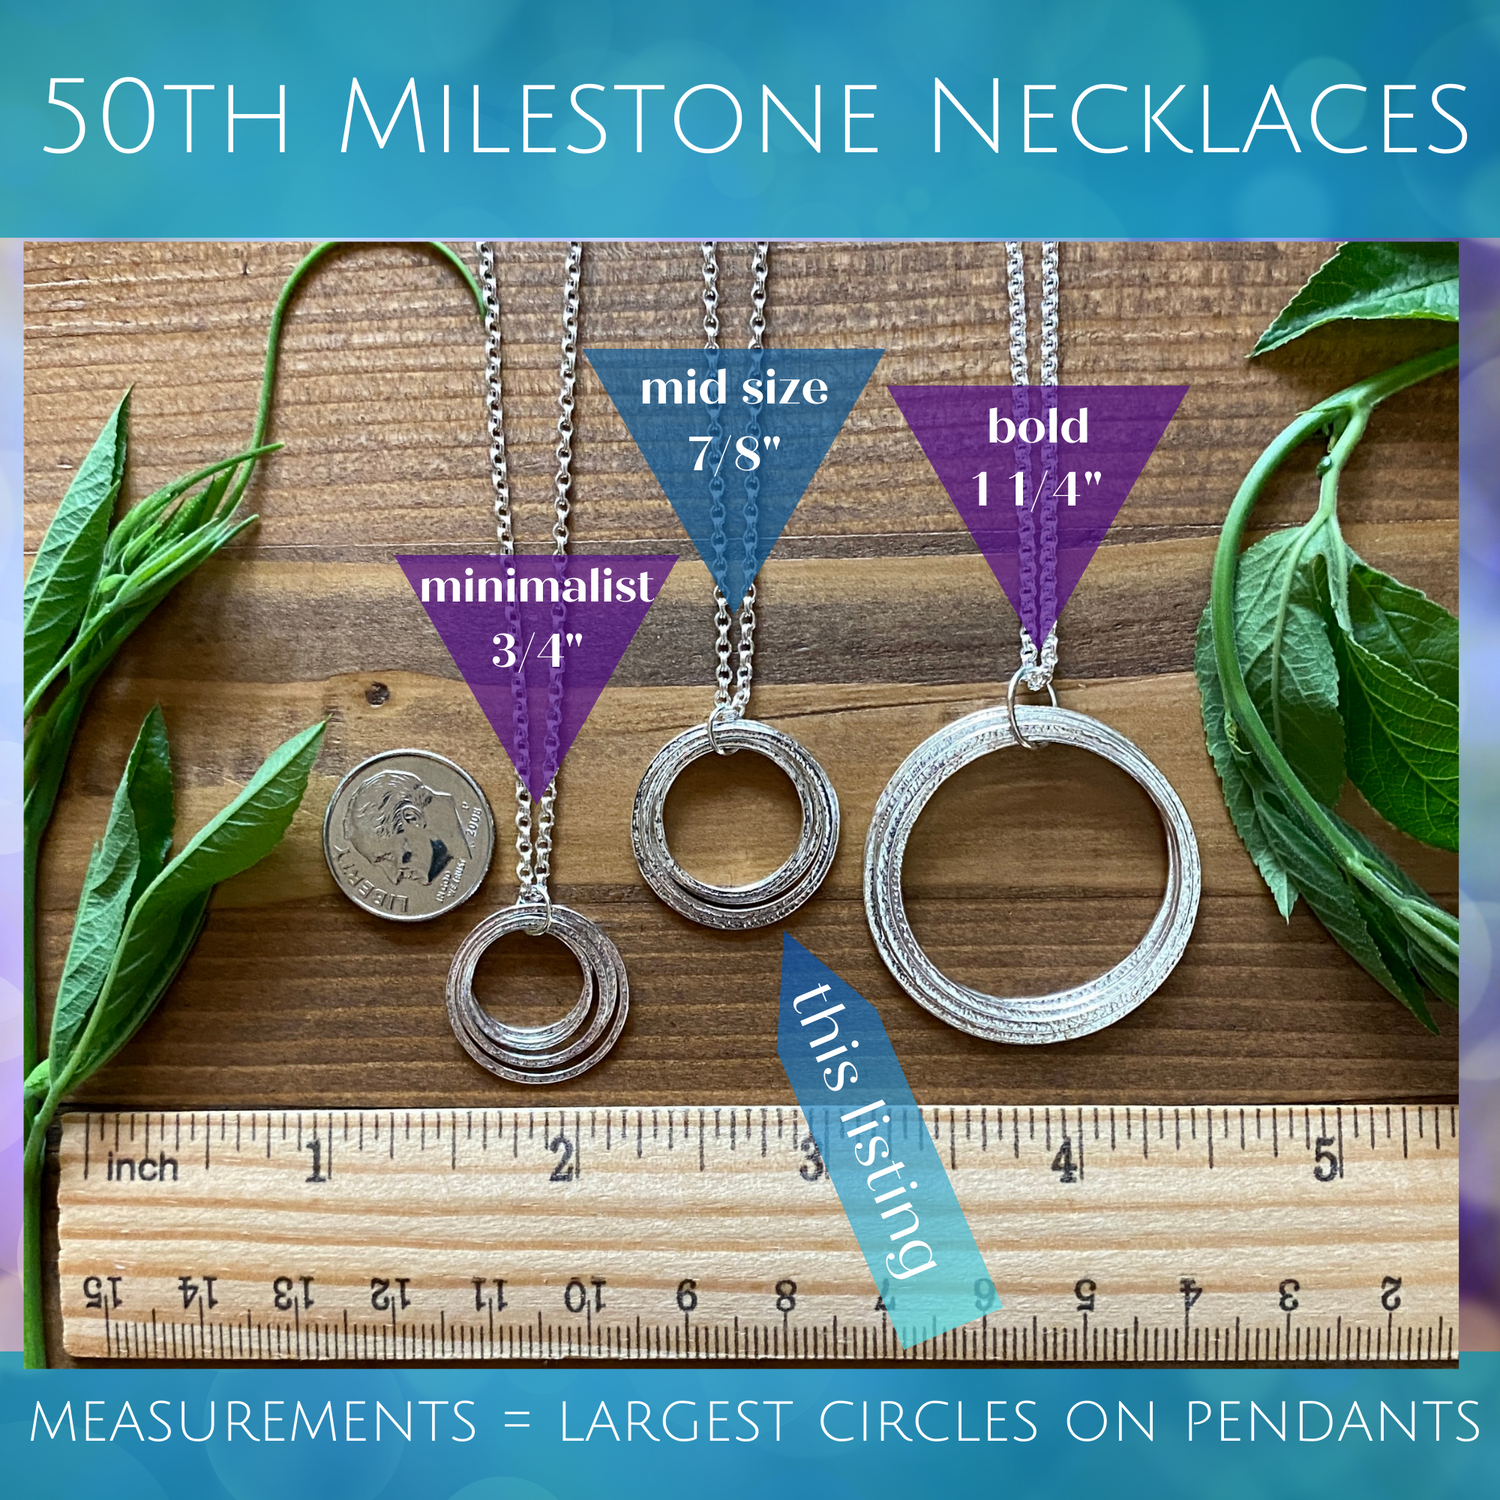 50th Mid Size Necklace from Amy Friend Jewelry